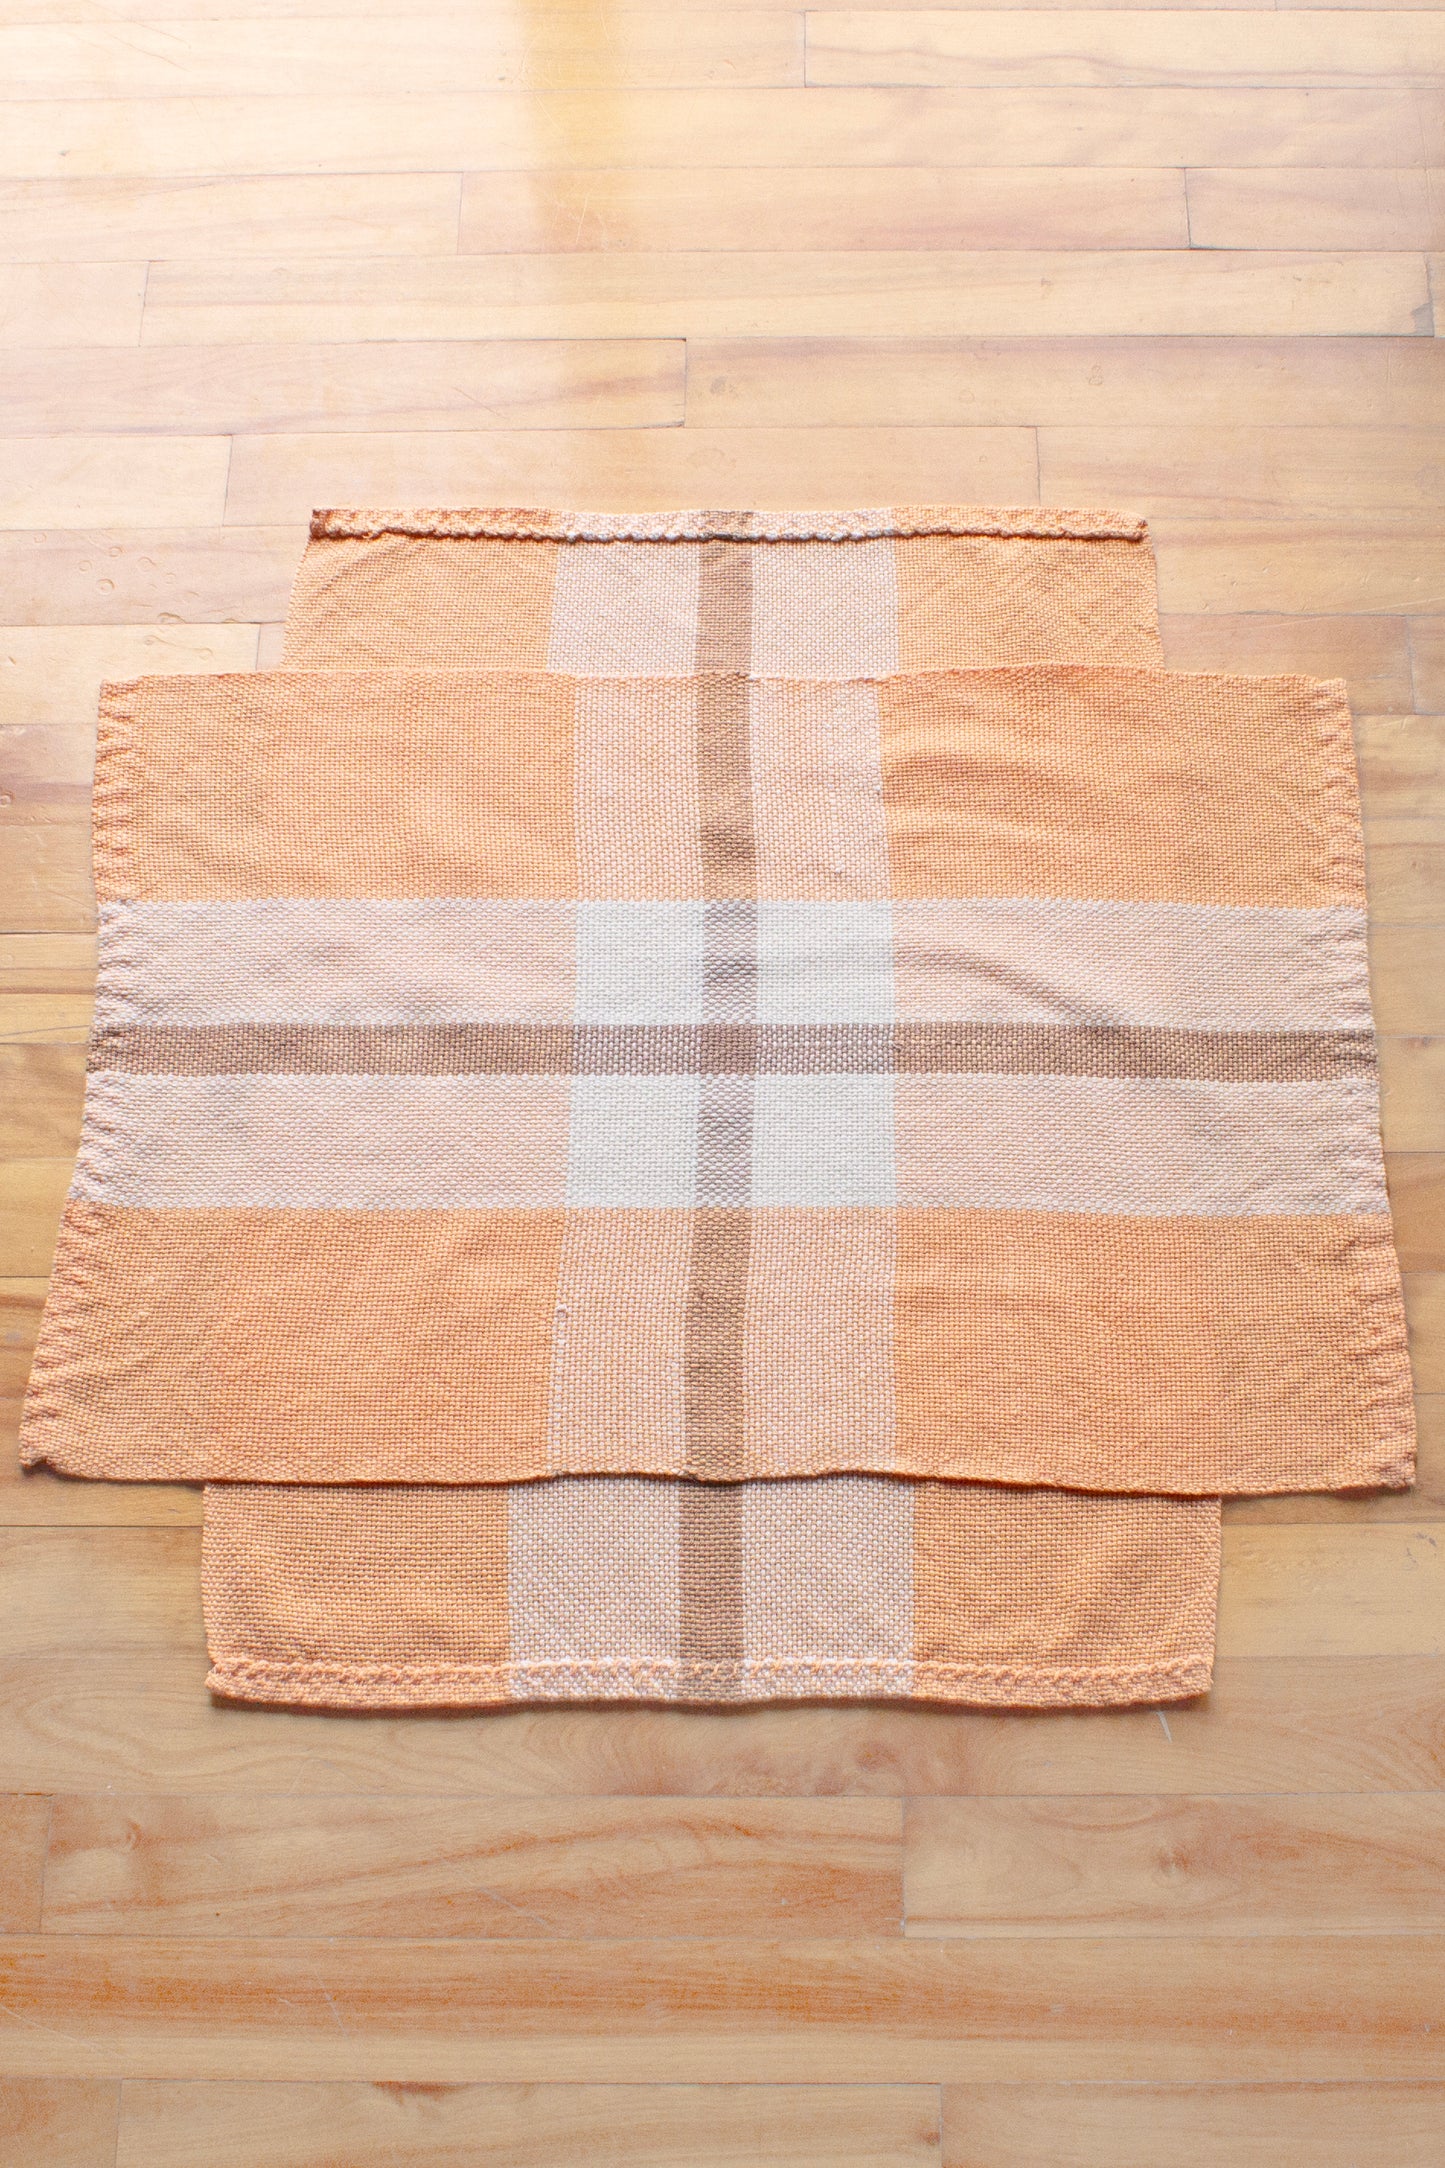 Cotton dish towel, striped orange, brown, white, off-white, handmade, natural fibres, washer and dryer safe, hemmed, hand sewn hem, made in Canada